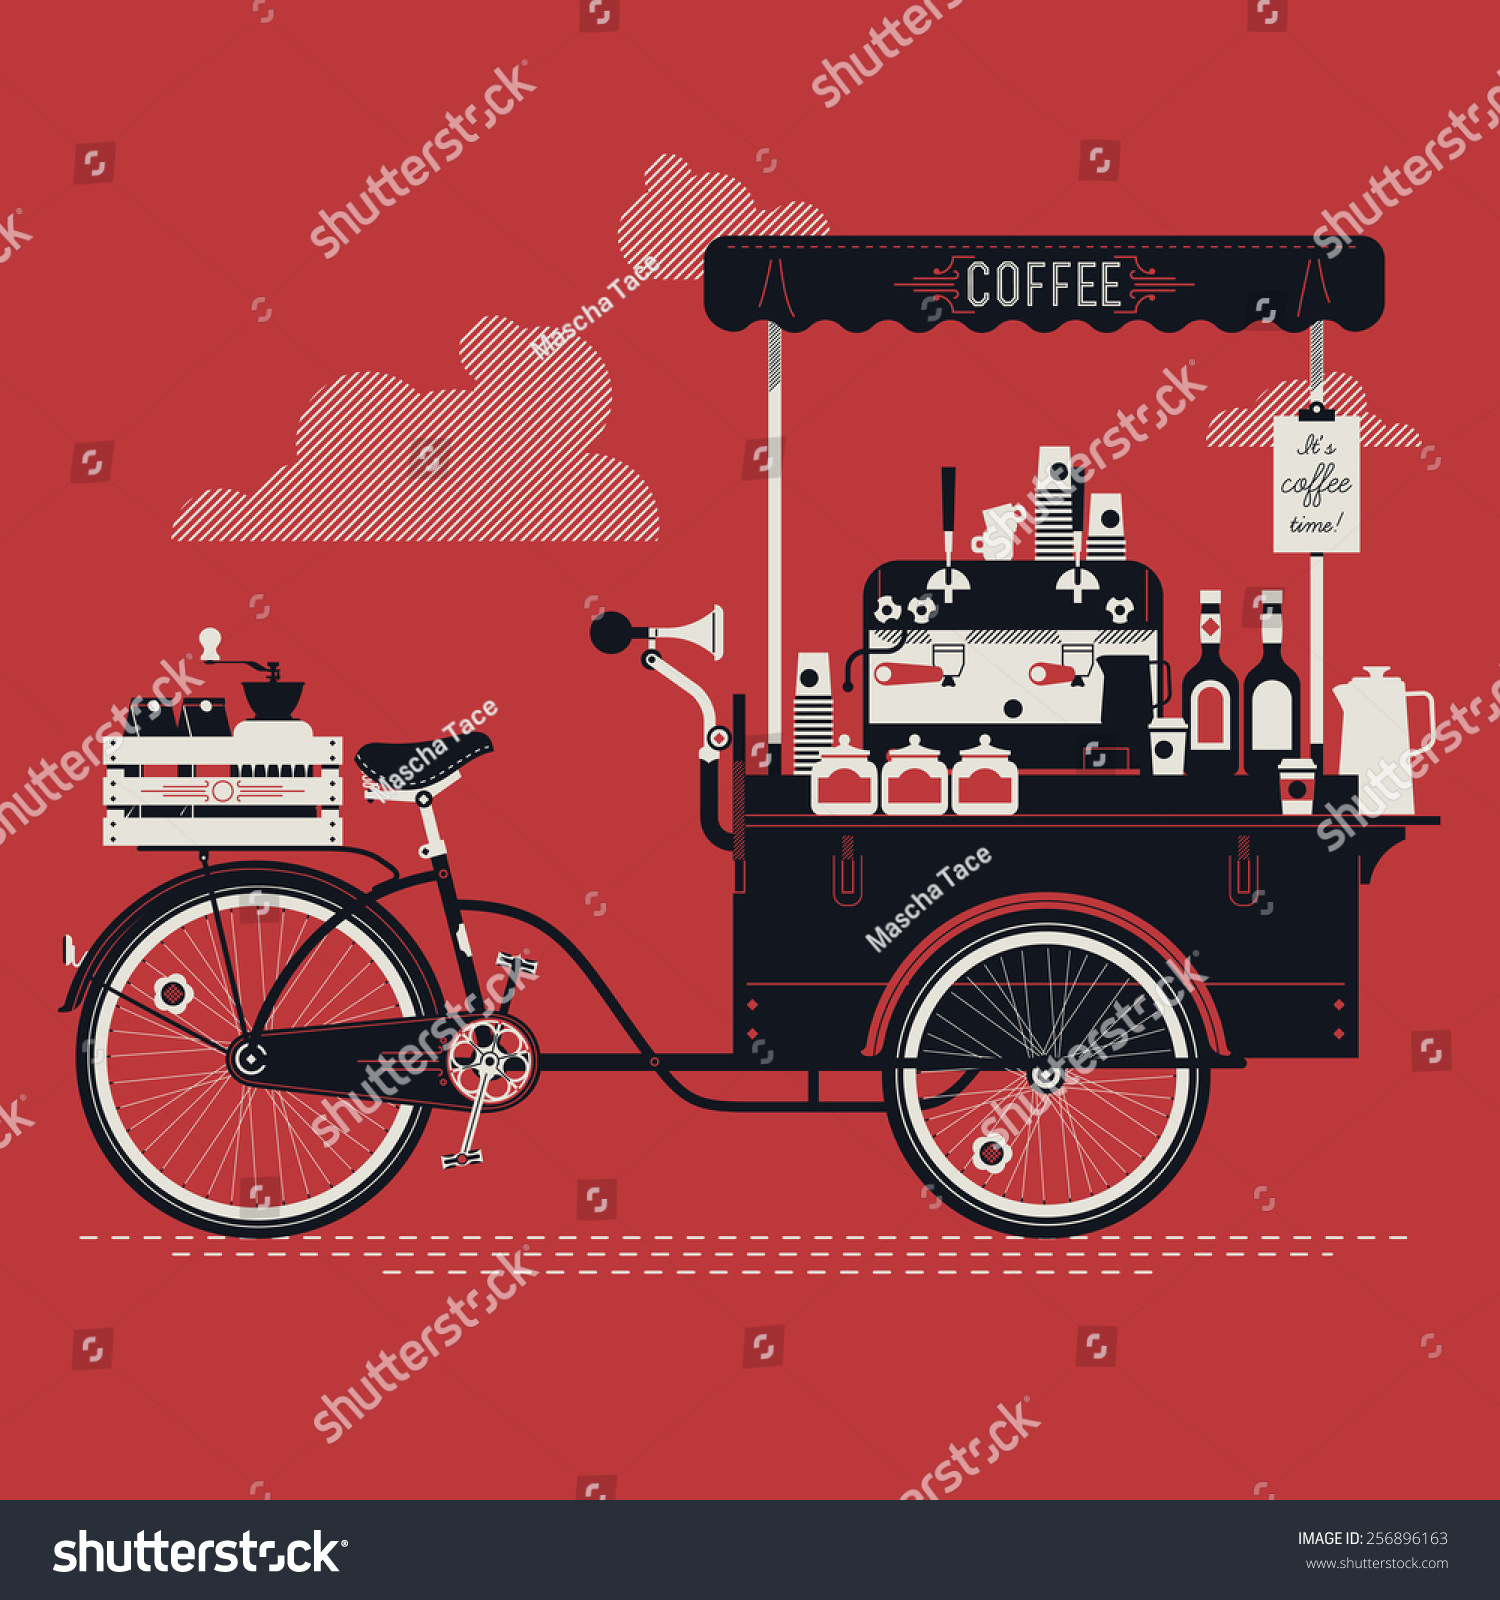 SVG of Cool detailed vector street coffee bicycle cart three colored illustration | Mobile retro bike powered cafe with espresso machine, syrup bottles, wooden crate on rear rack, disposable cups and more svg